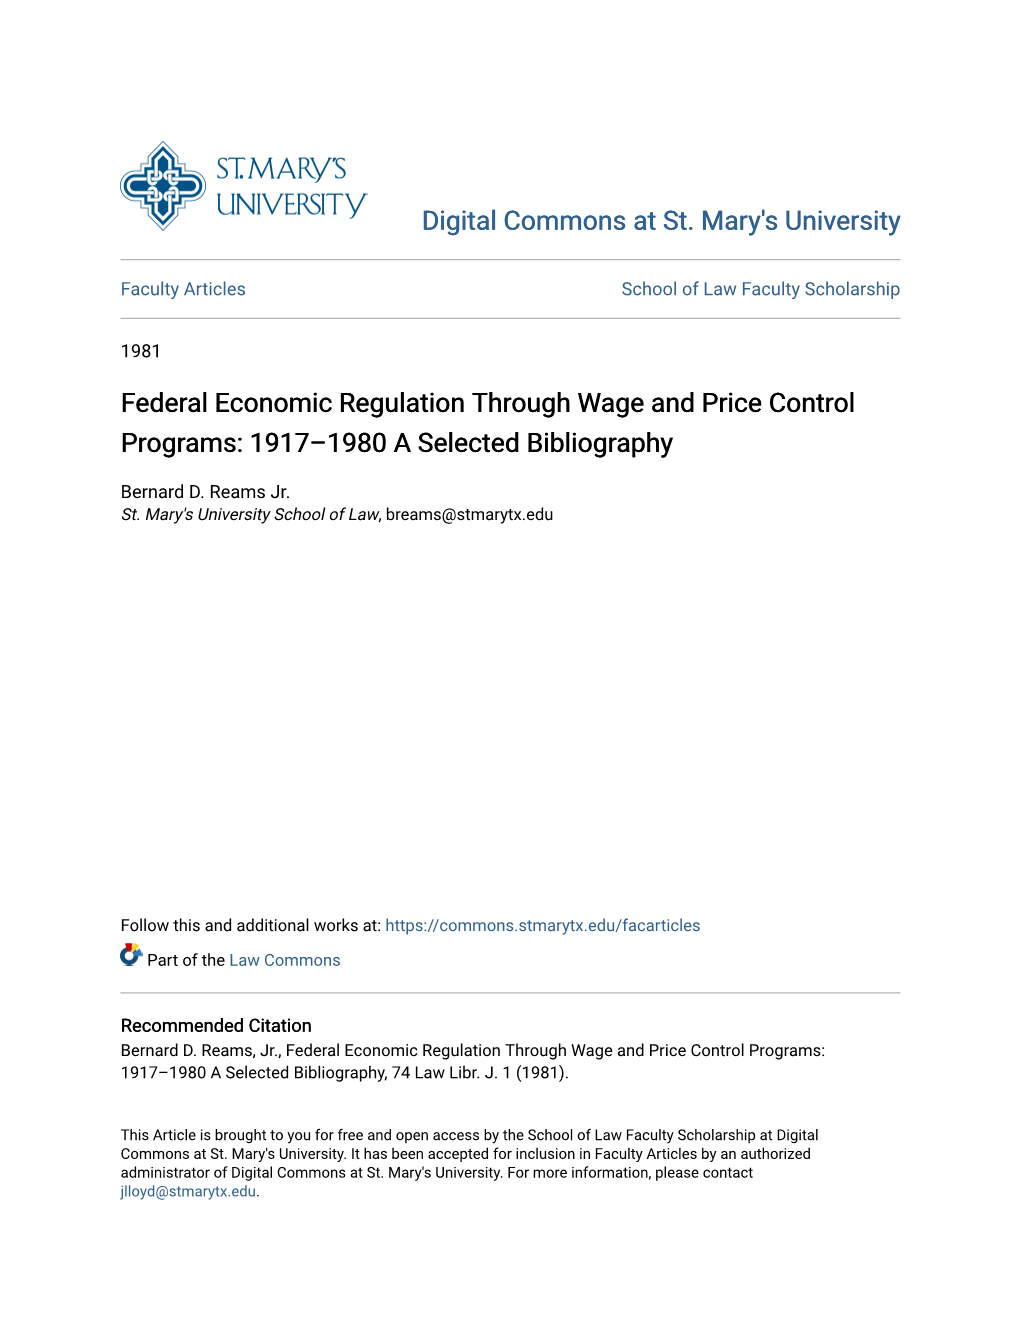 Federal Economic Regulation Through Wage and Price Control Programs: 1917–1980 a Selected Bibliography